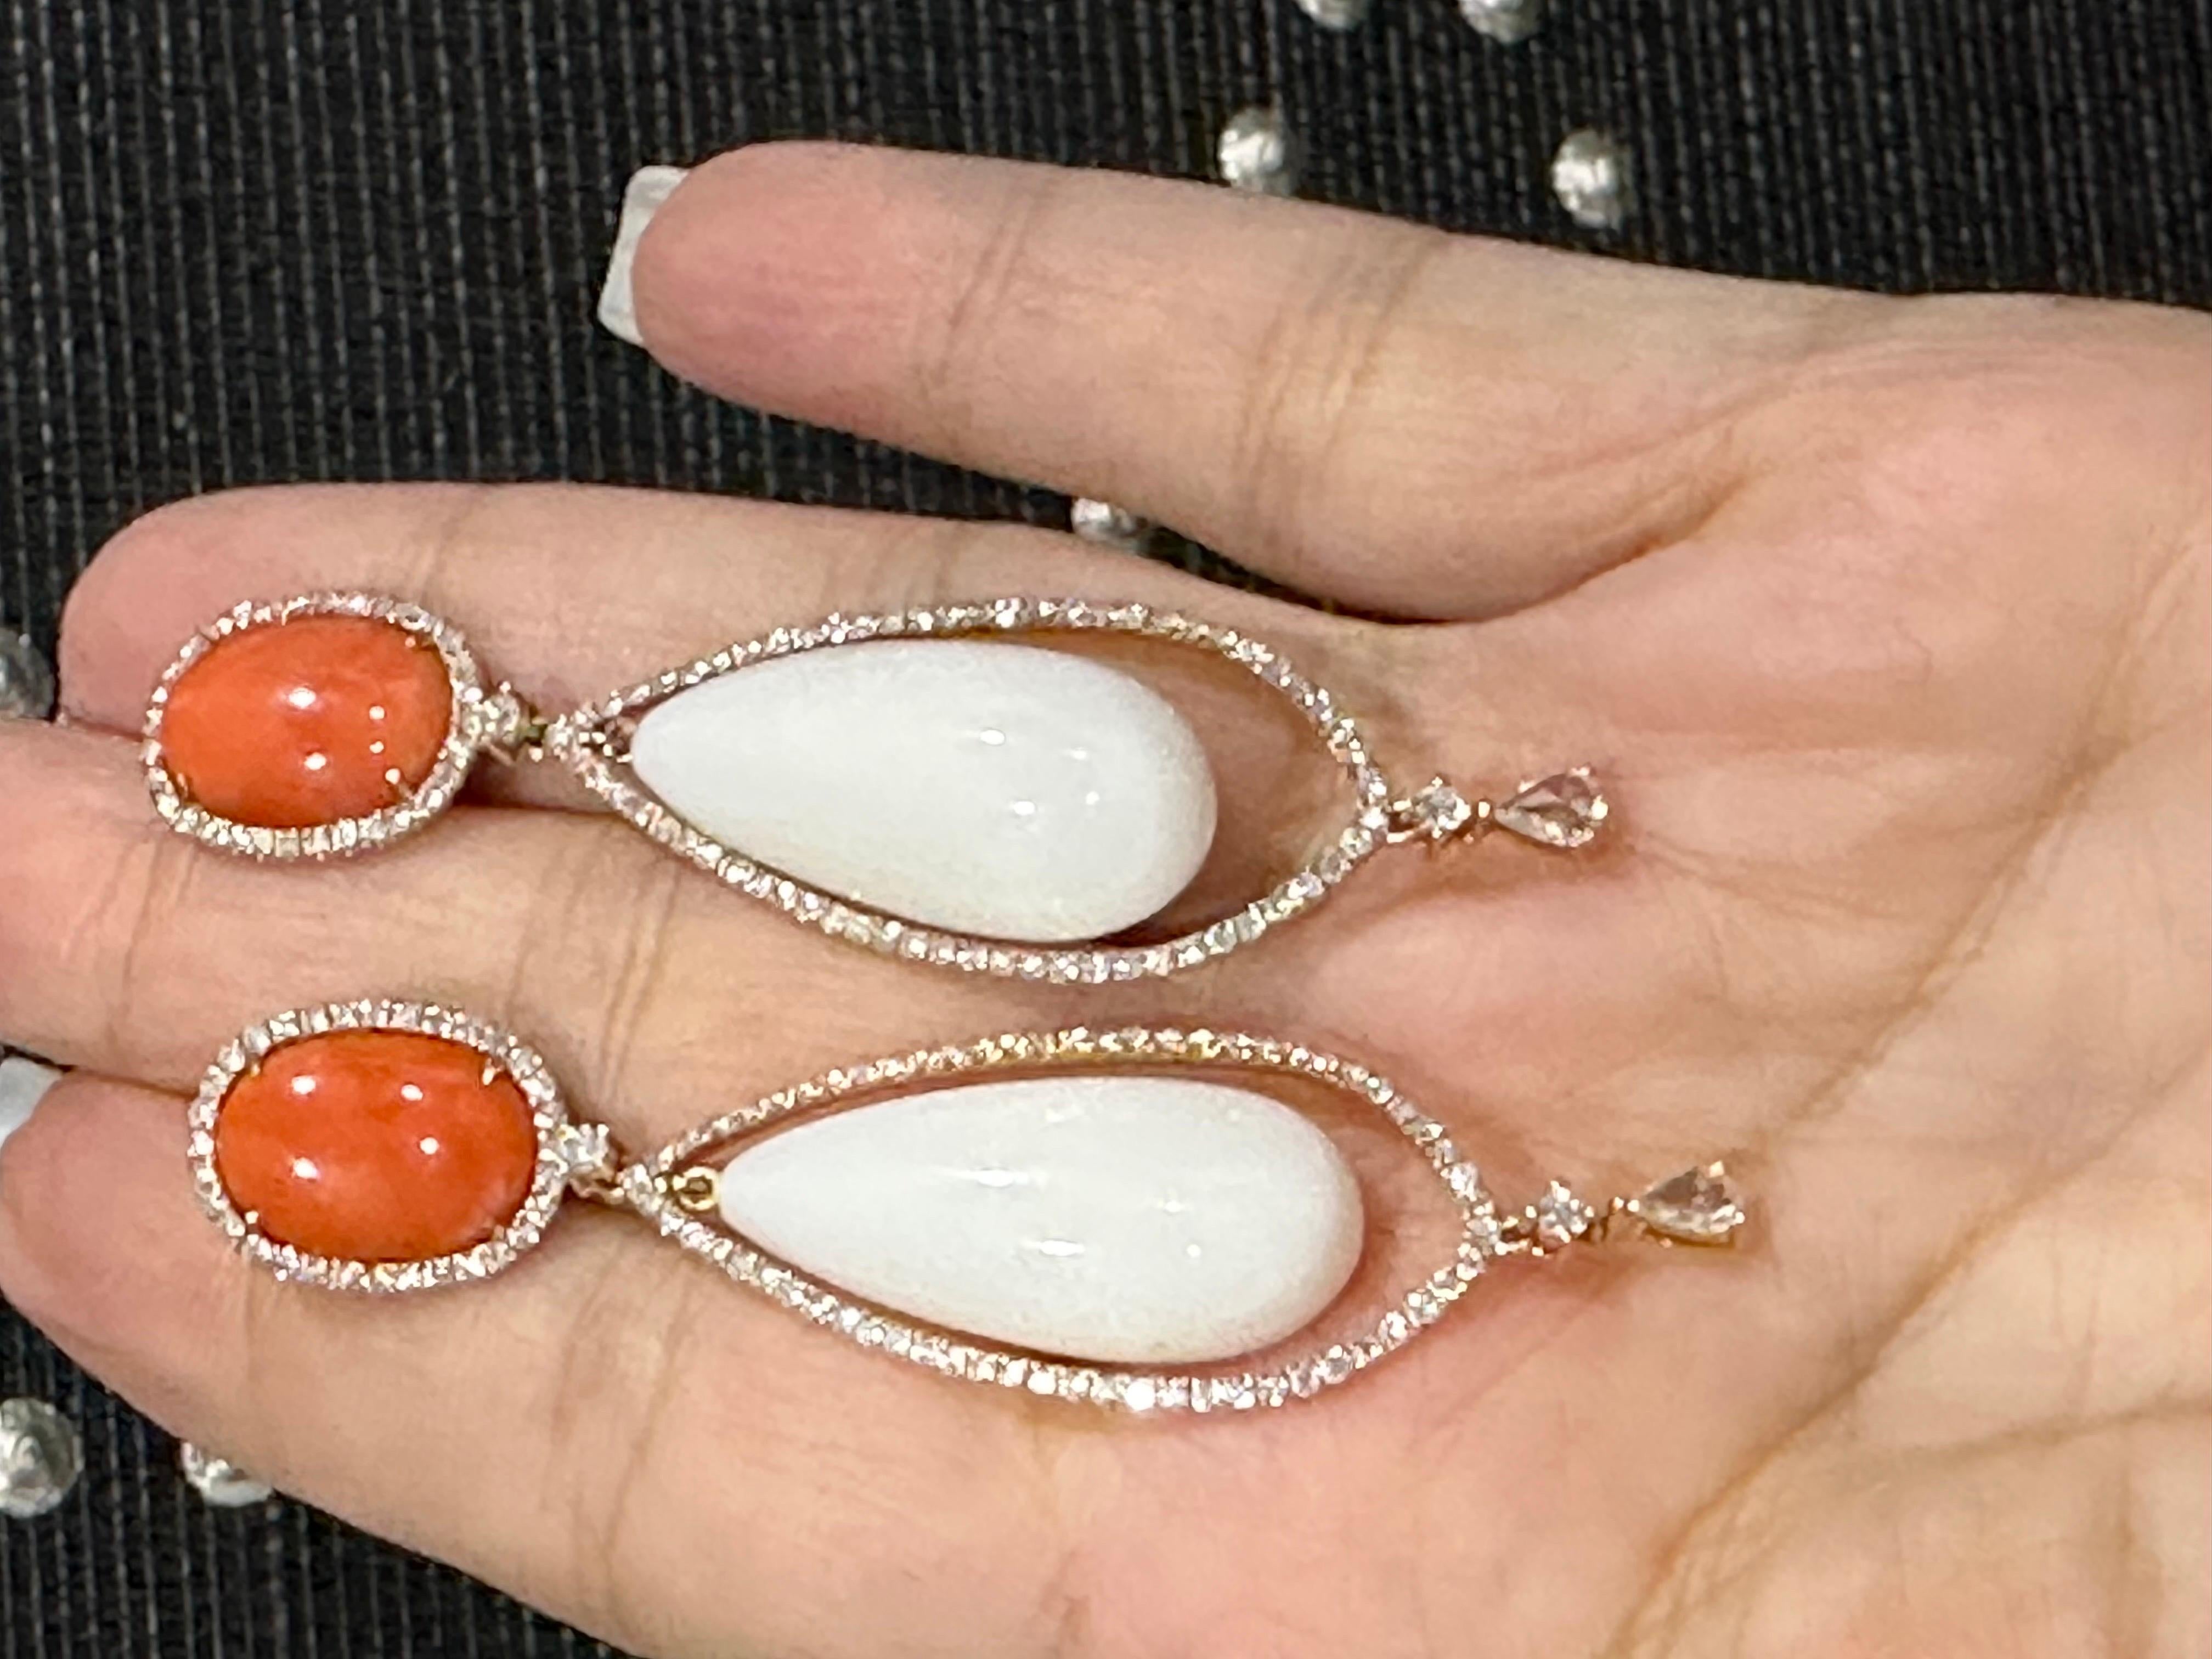 Coral is not just for summer! These white and orange/peach coral earrings are surrounded by round brilliant diamonds and a pear shape rose cut diamond glistening on bottom. Style with your winter white sweaters little black dress.
Appprox. 1.25+